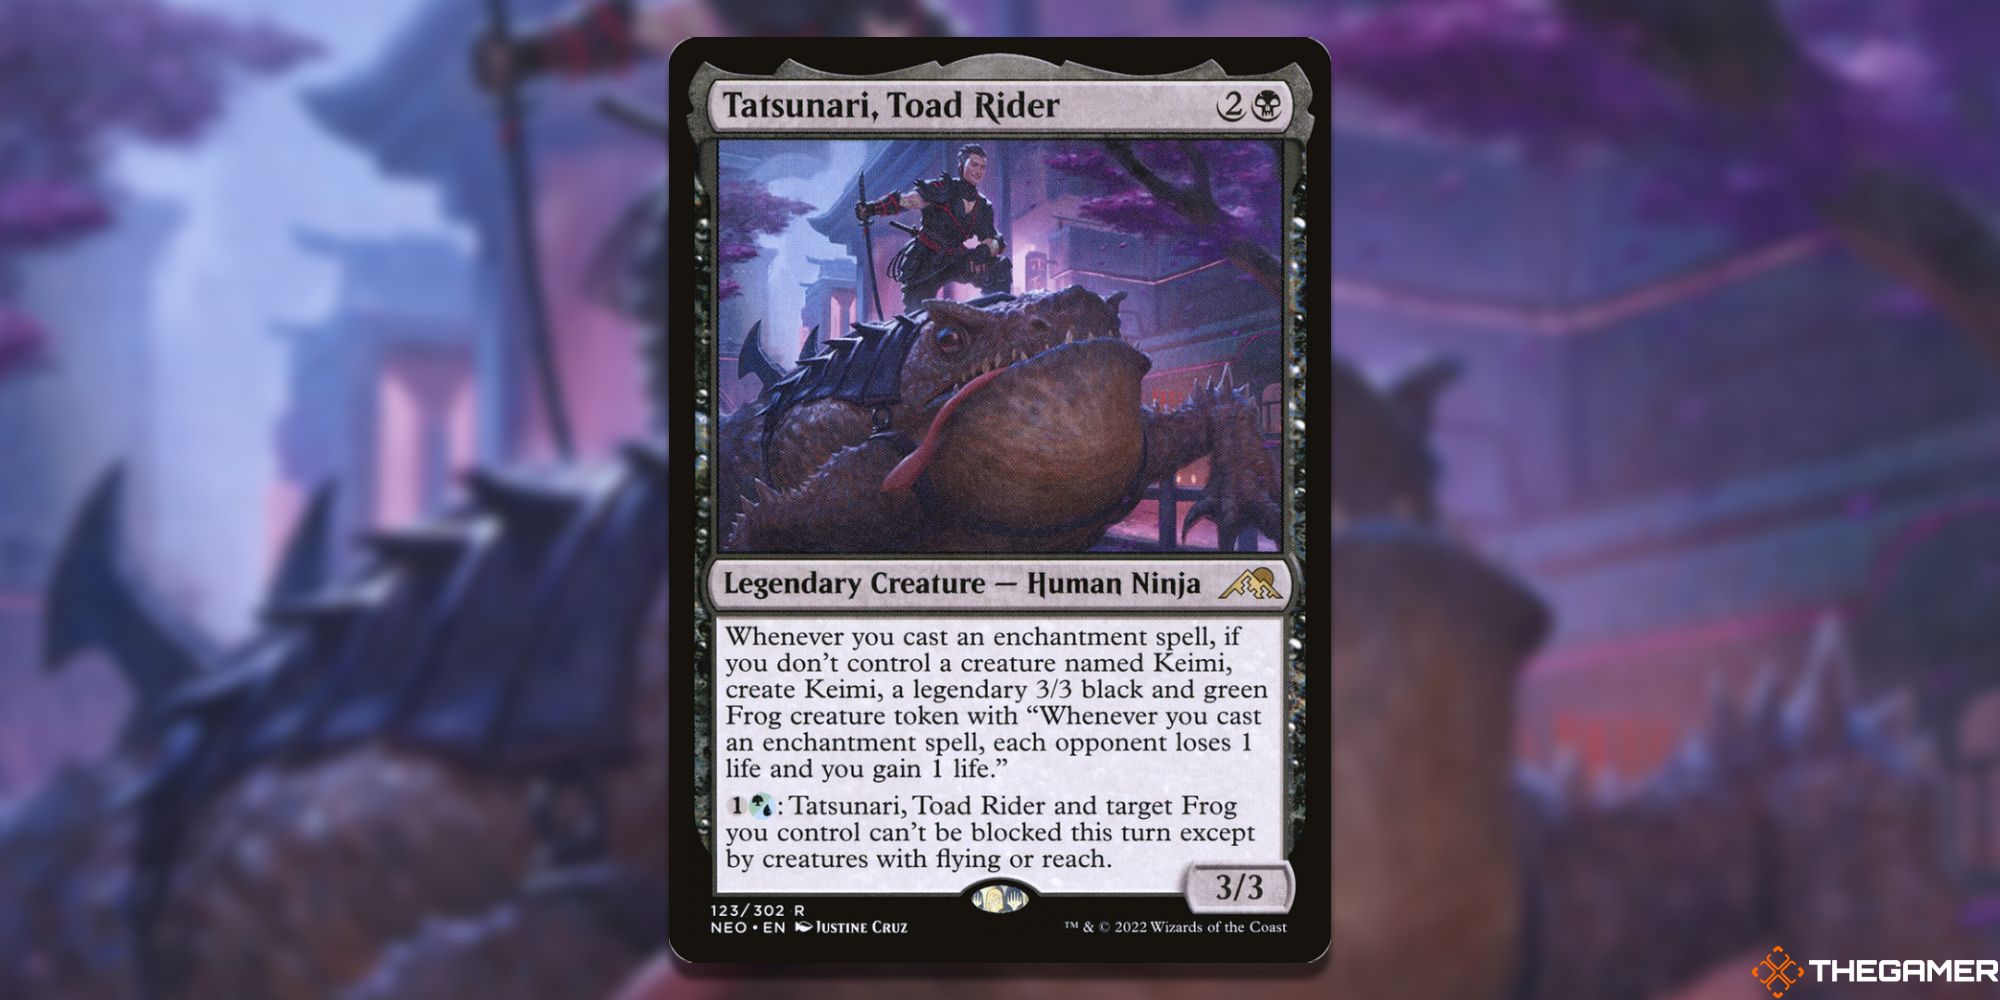 Image of the Tatsunari, Toad Rider card in Magic: The Gathering, with art by Justine Cruz